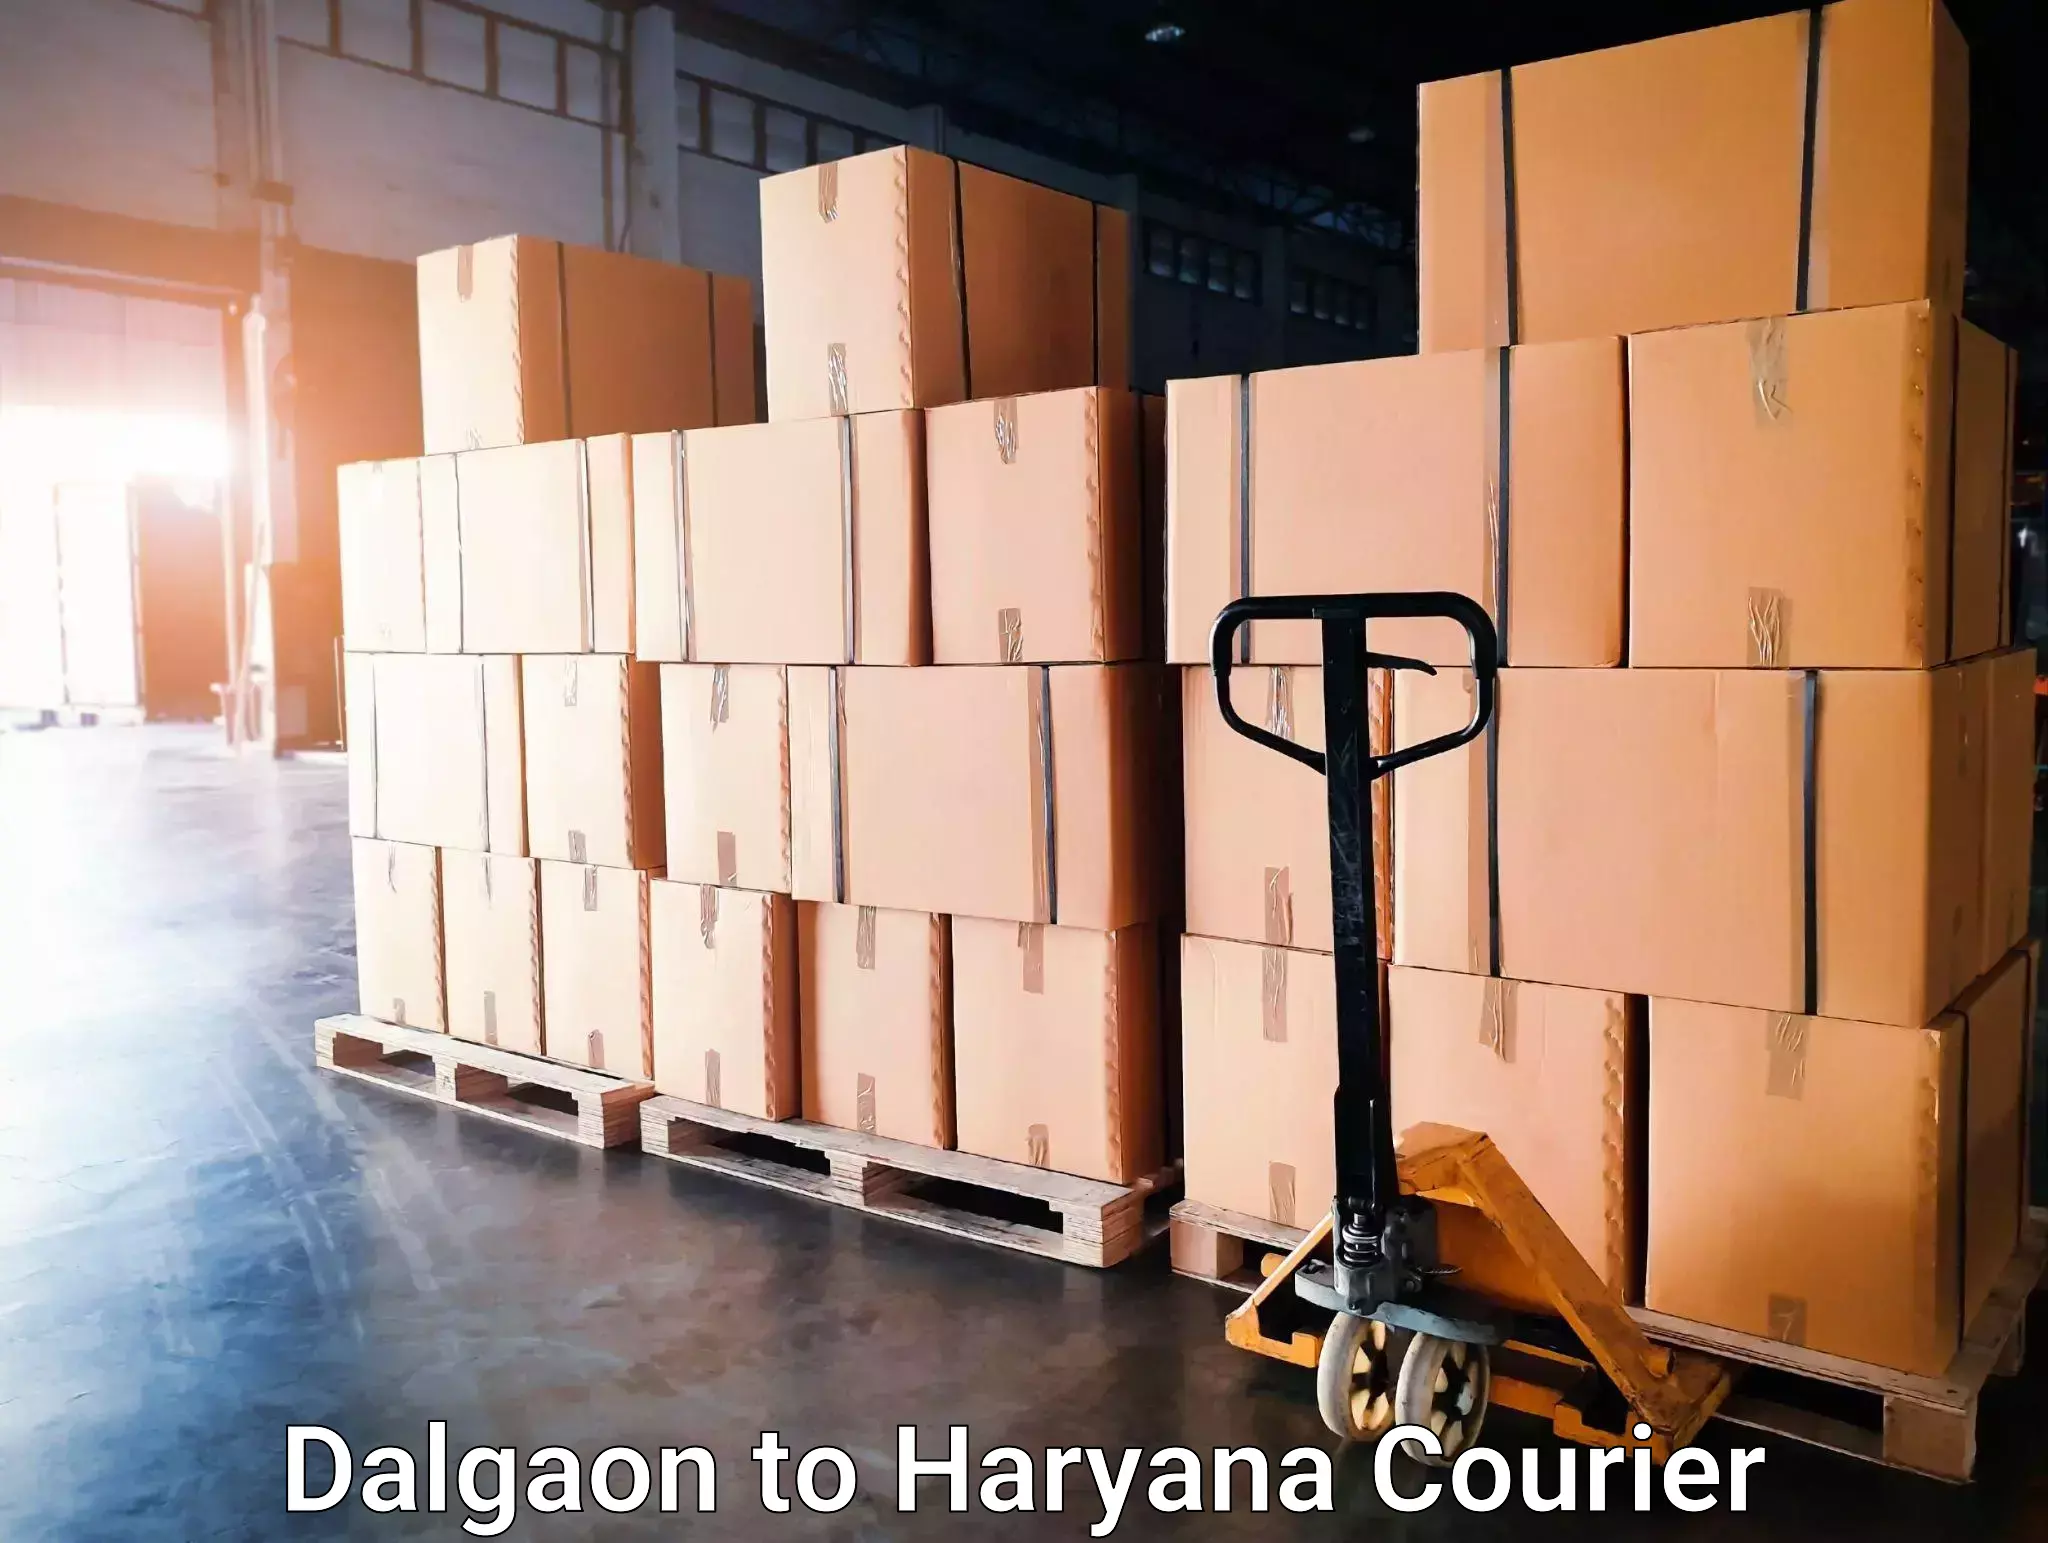 Global shipping networks Dalgaon to Pinjore